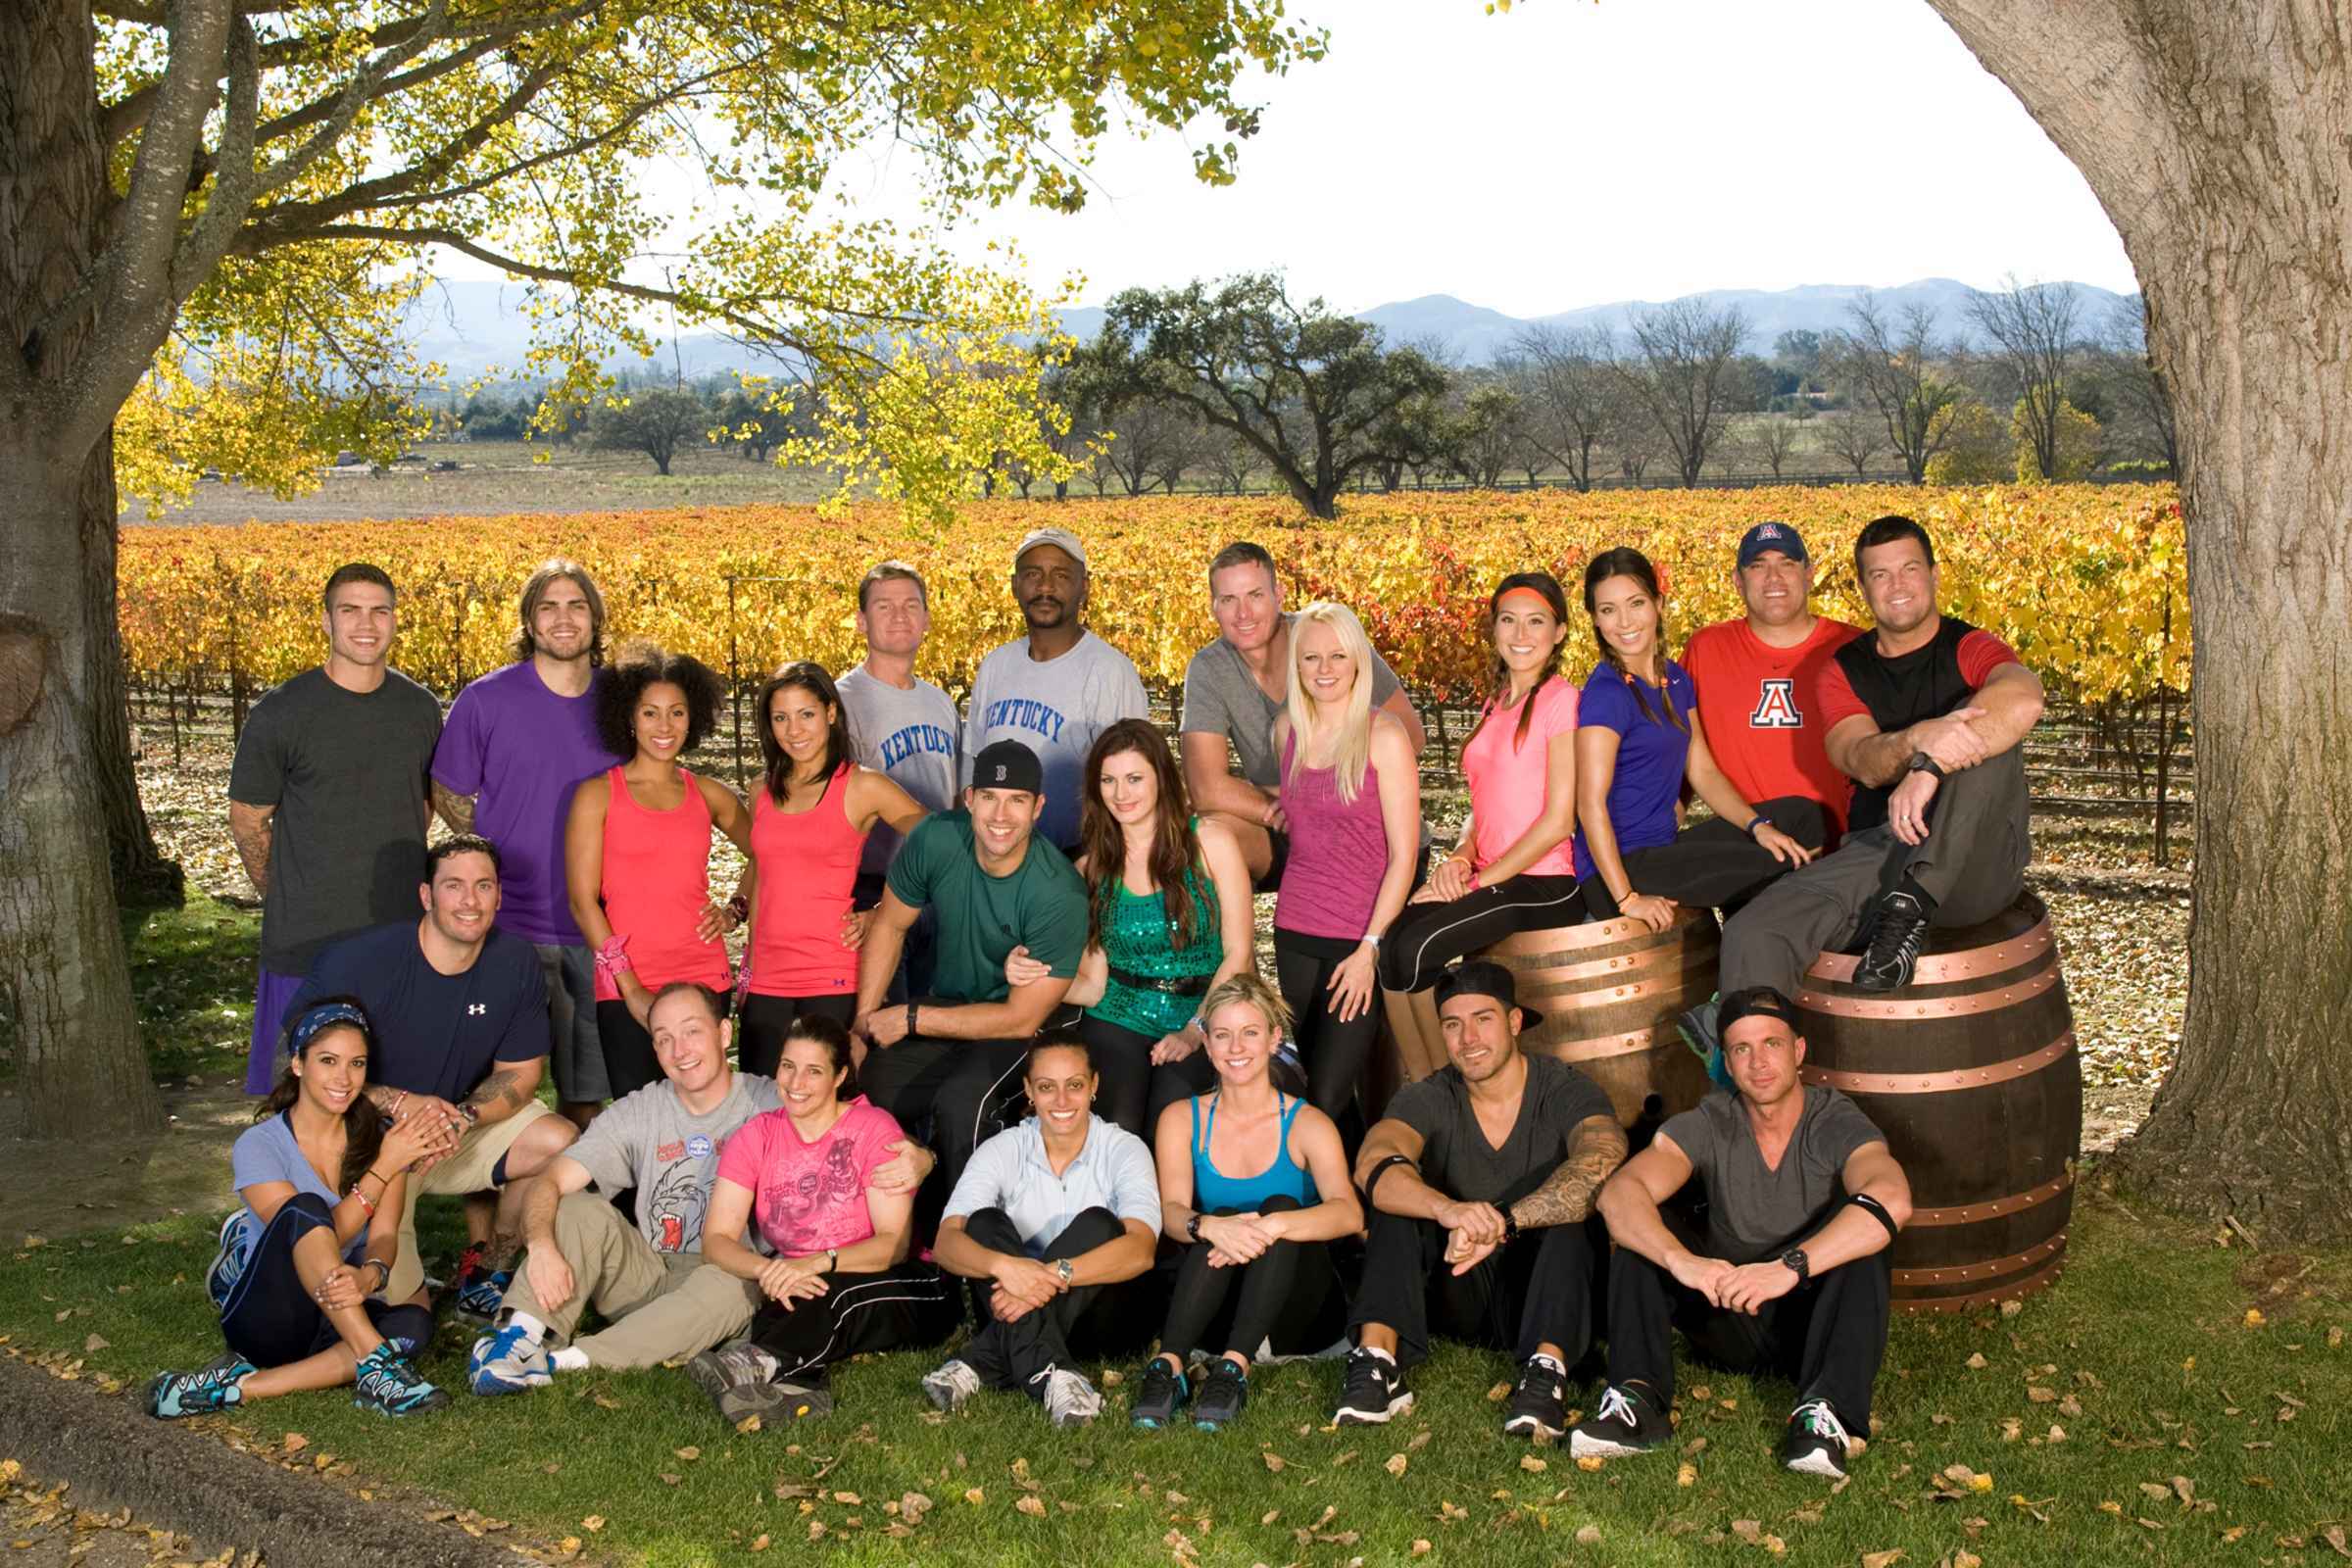 Our alltime favorite moments from 'The Amazing Race' Film Daily